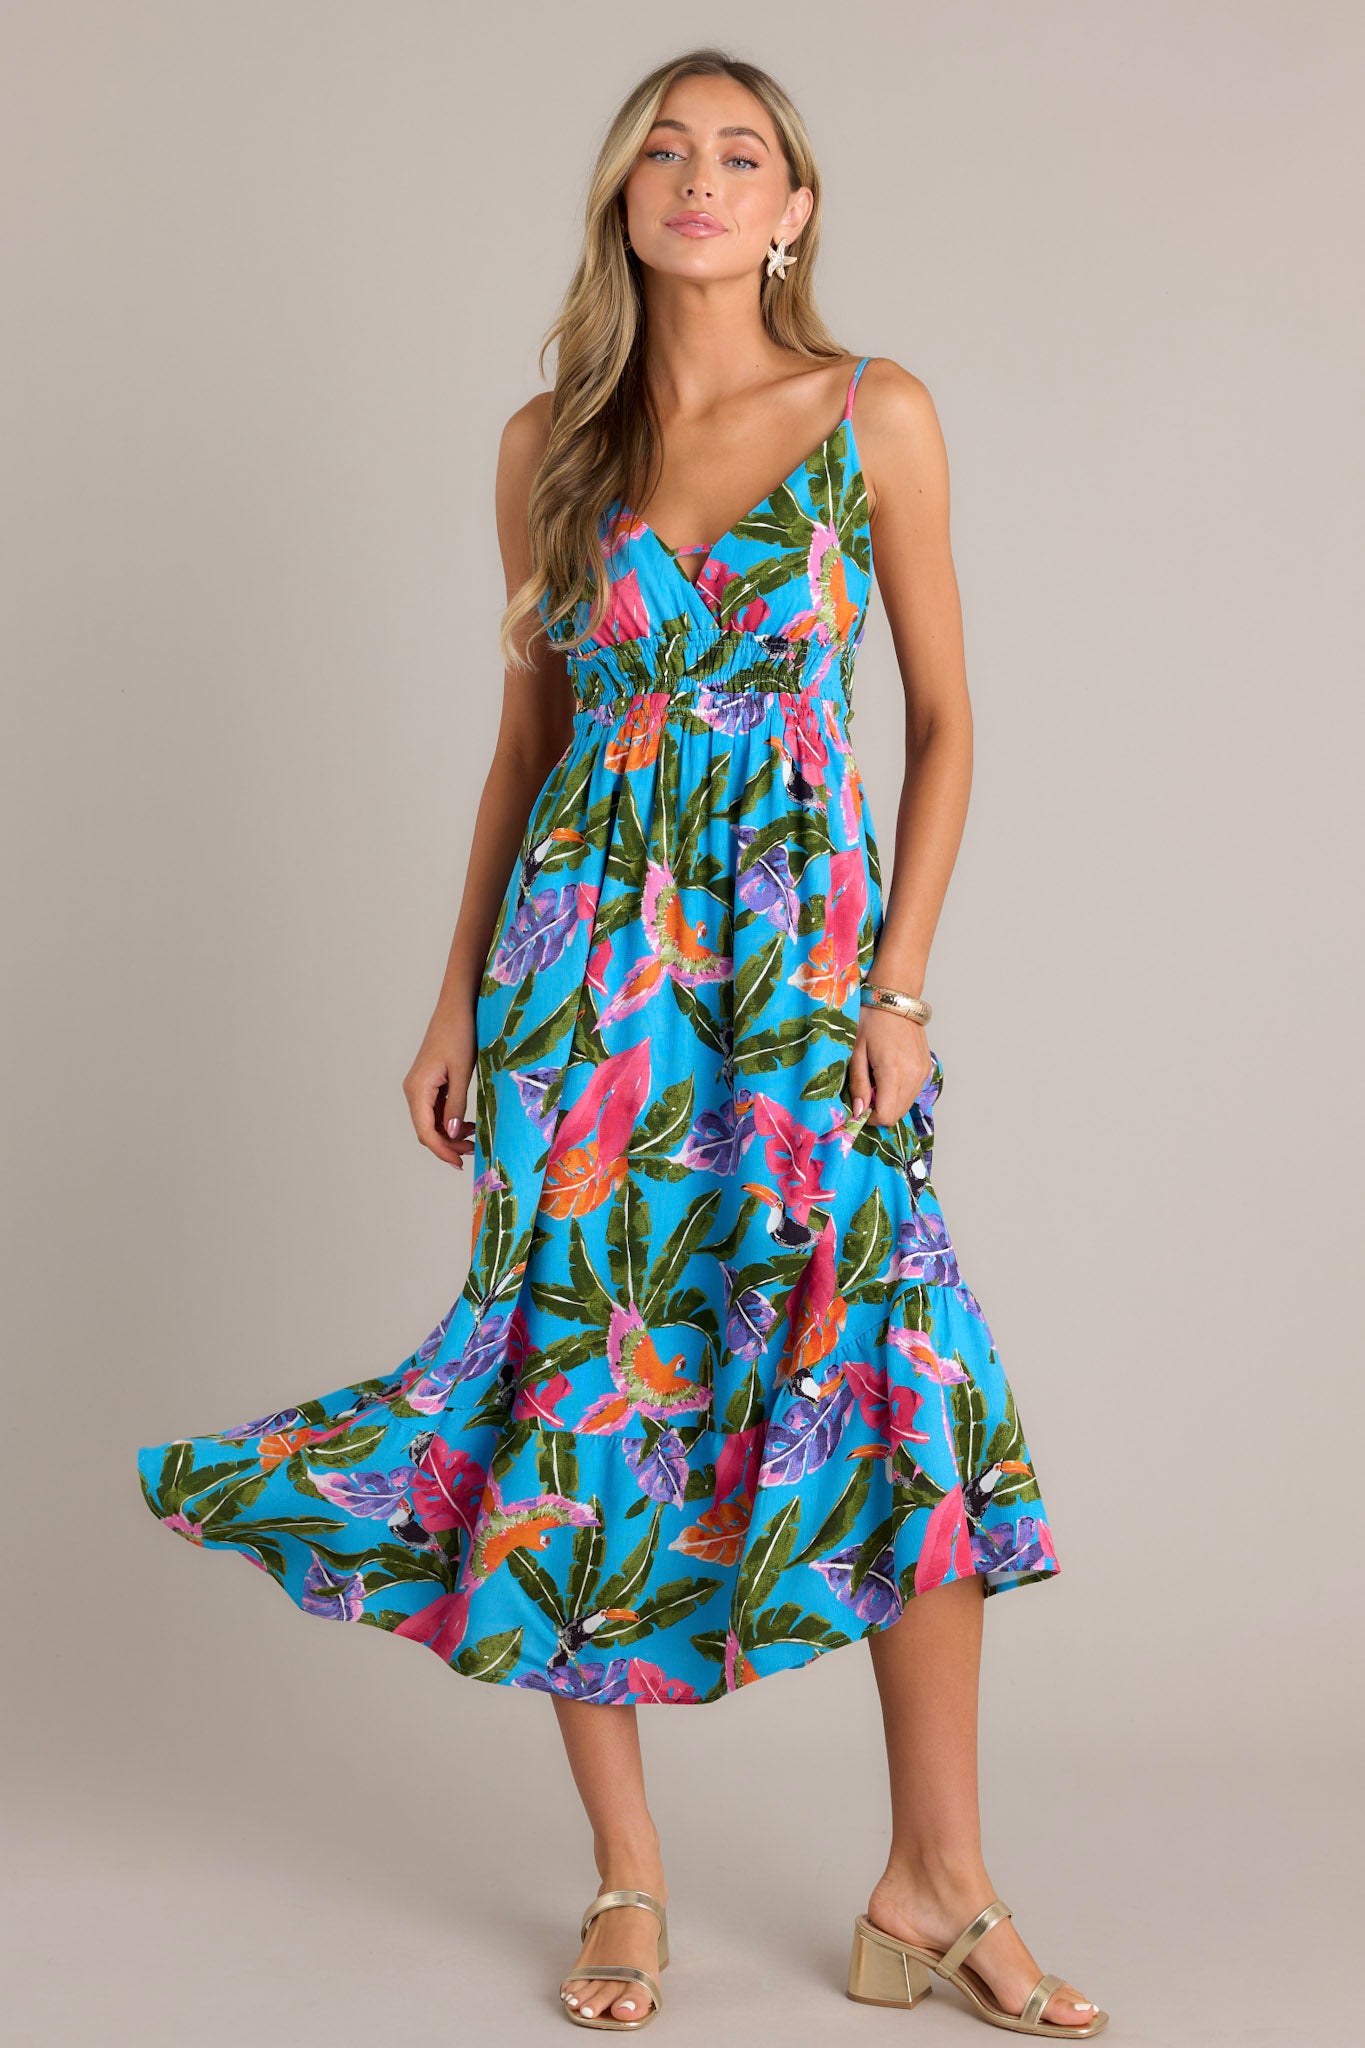 This blue midi dress features v-neckline, thin adjustable straps, an open back, a fully smocked waistband, a vibrant color scheme, and a flowing silhouette.